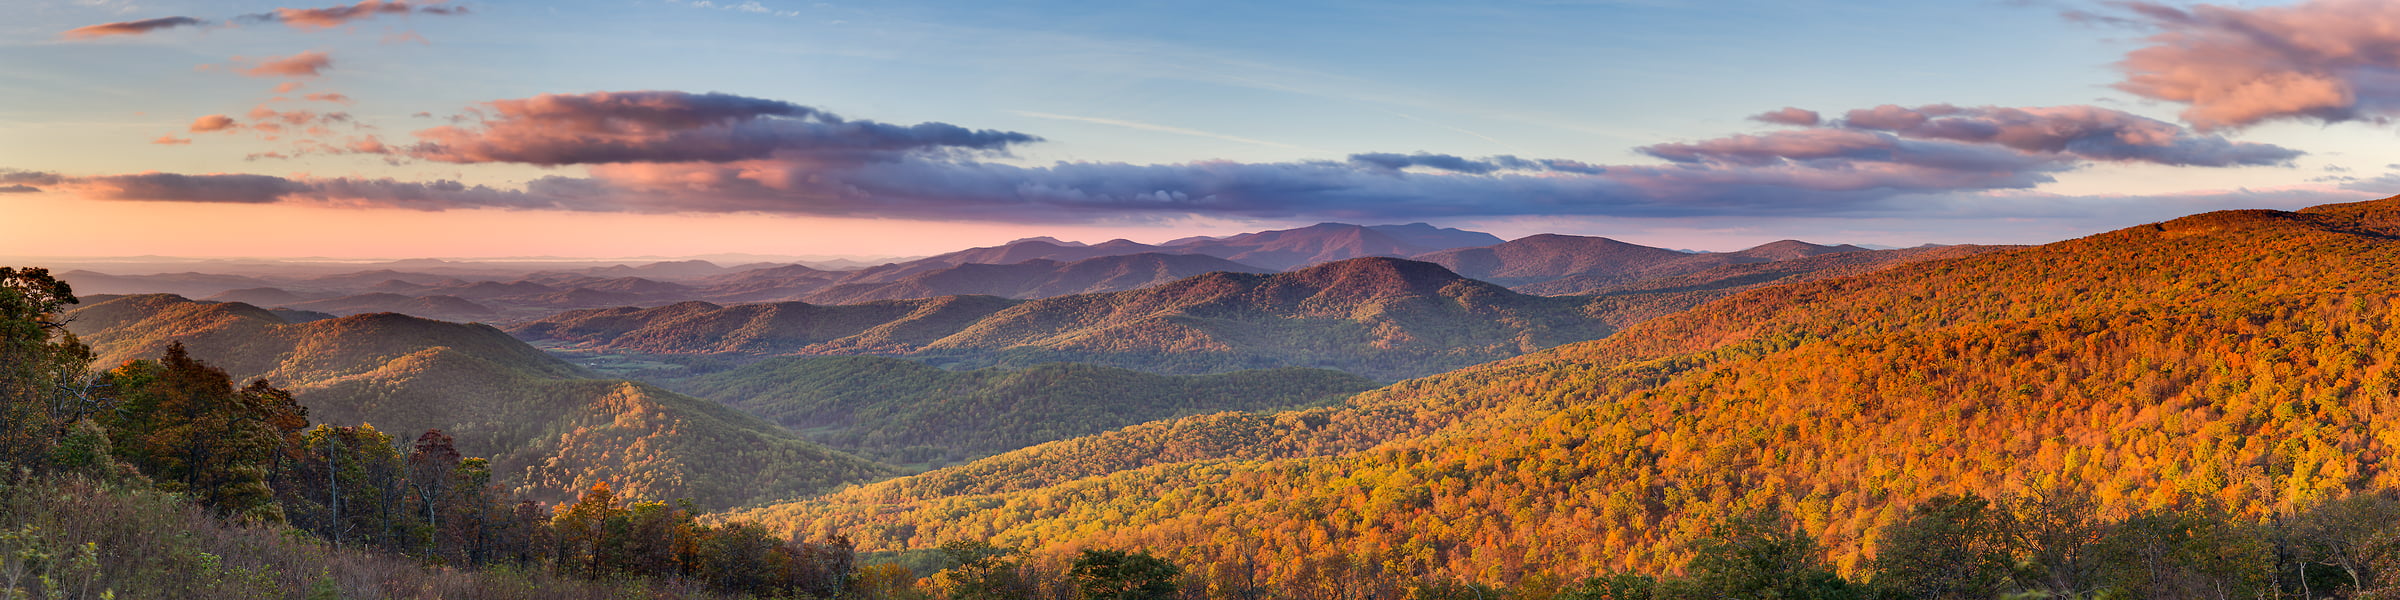 128 megapixels! A very high resolution, large-format VAST photo of fall foliage in the Appalachian mountains at sunrise on Skyline Drive in Shenandoah National Park; landscape panorama photograph created by Tim Lo Monaco in Rappahannock County, Virginia.